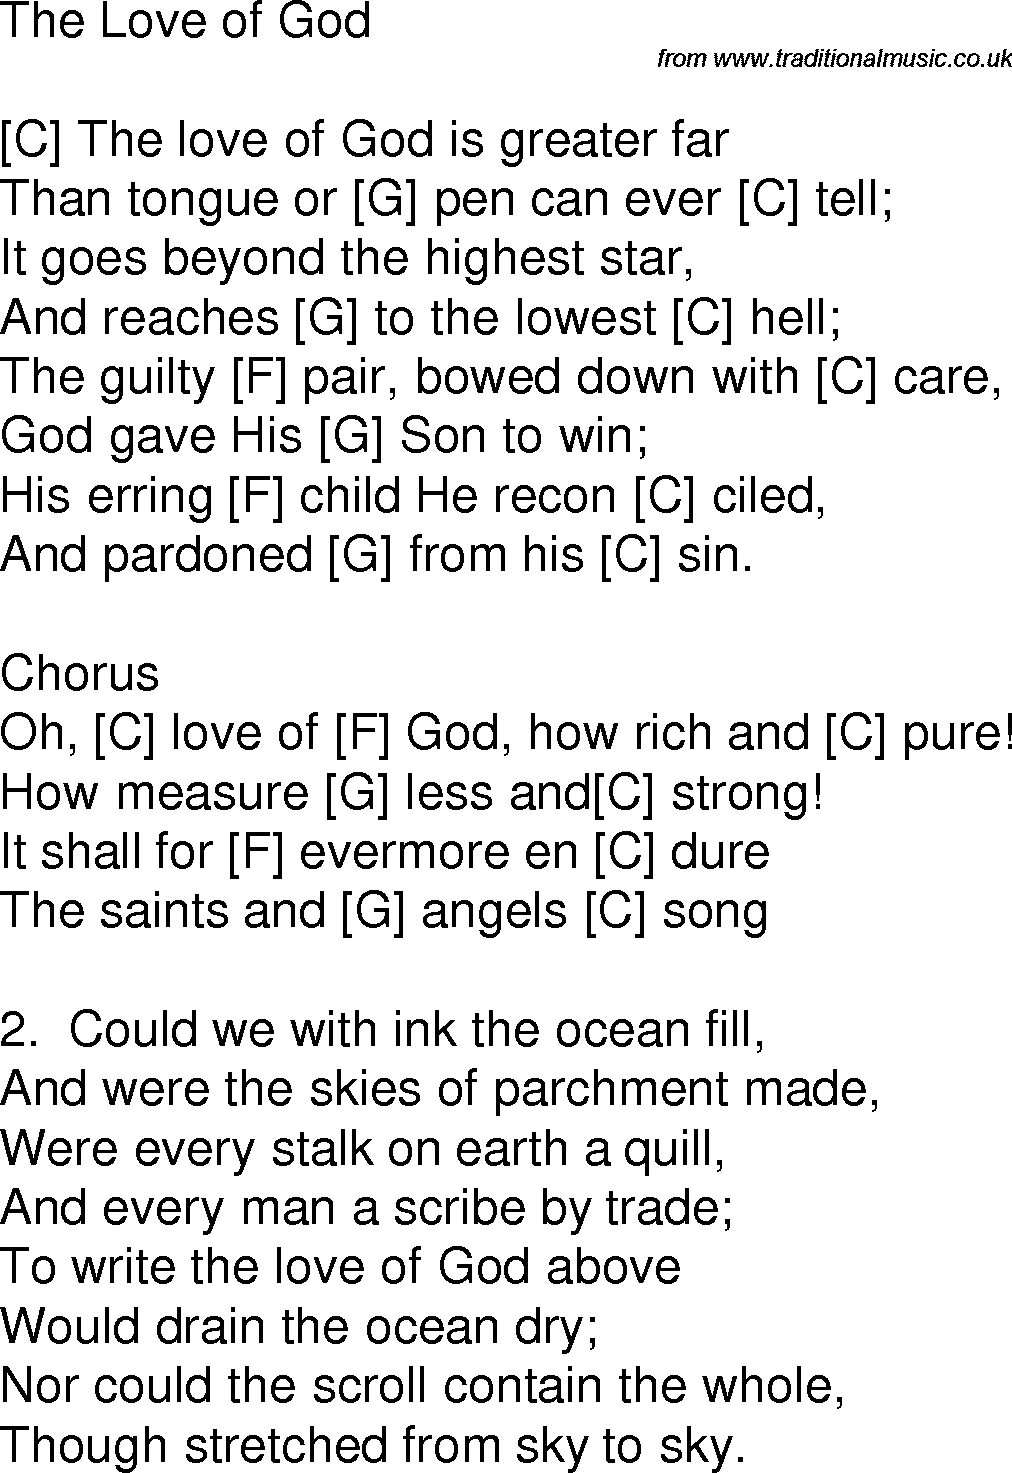 Old time song lyrics with chords for The Love Of God C